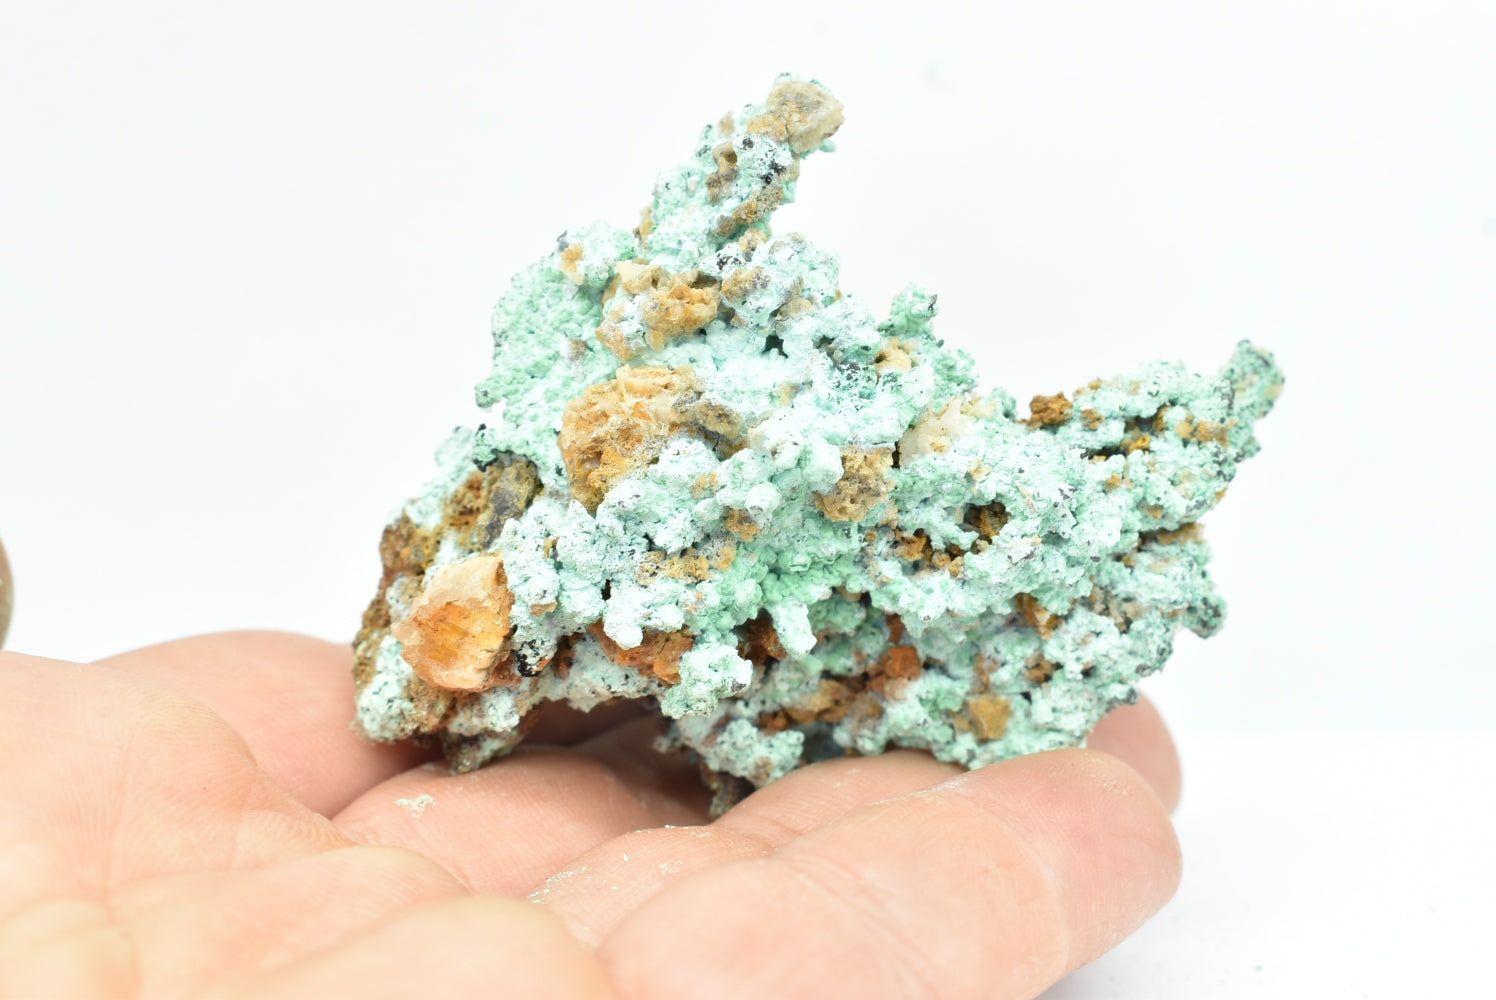 Copper with green oxidation